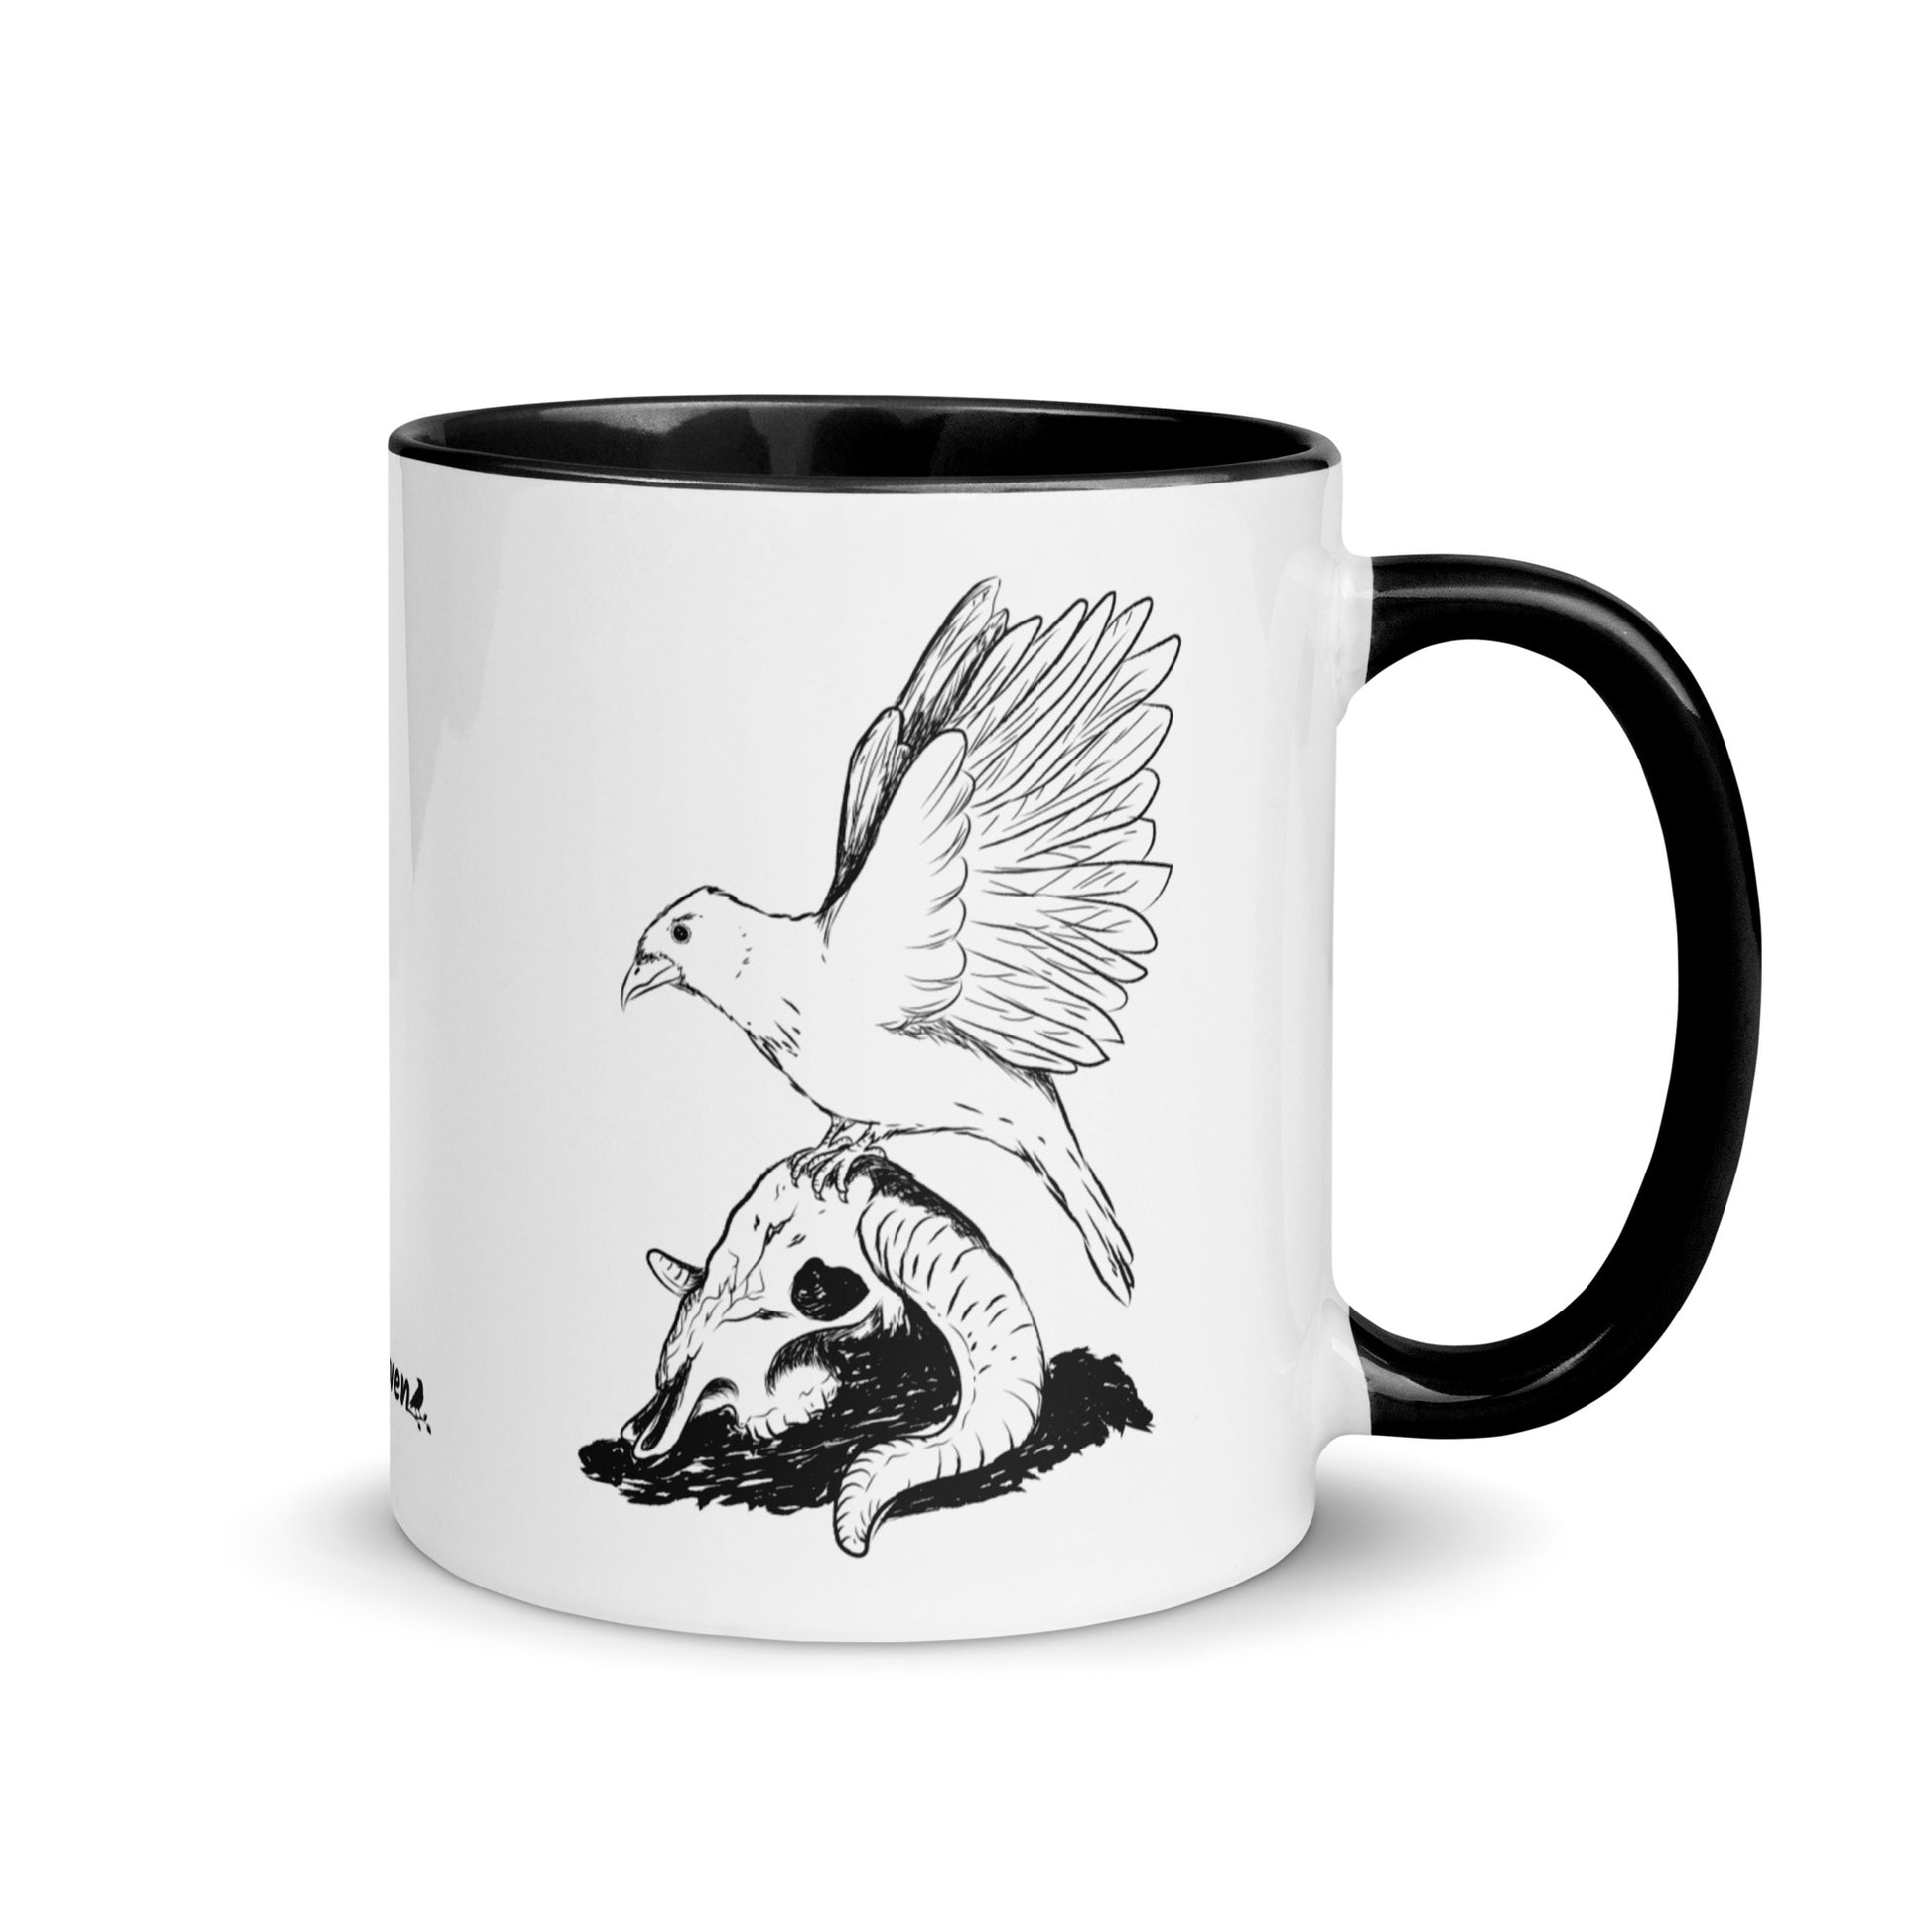 11 ounce white ceramic mug with black handle and inside. Features a double sided print of Reflections, a design with a crow sitting on a sheep skull. Dishwasher and microwave safe.